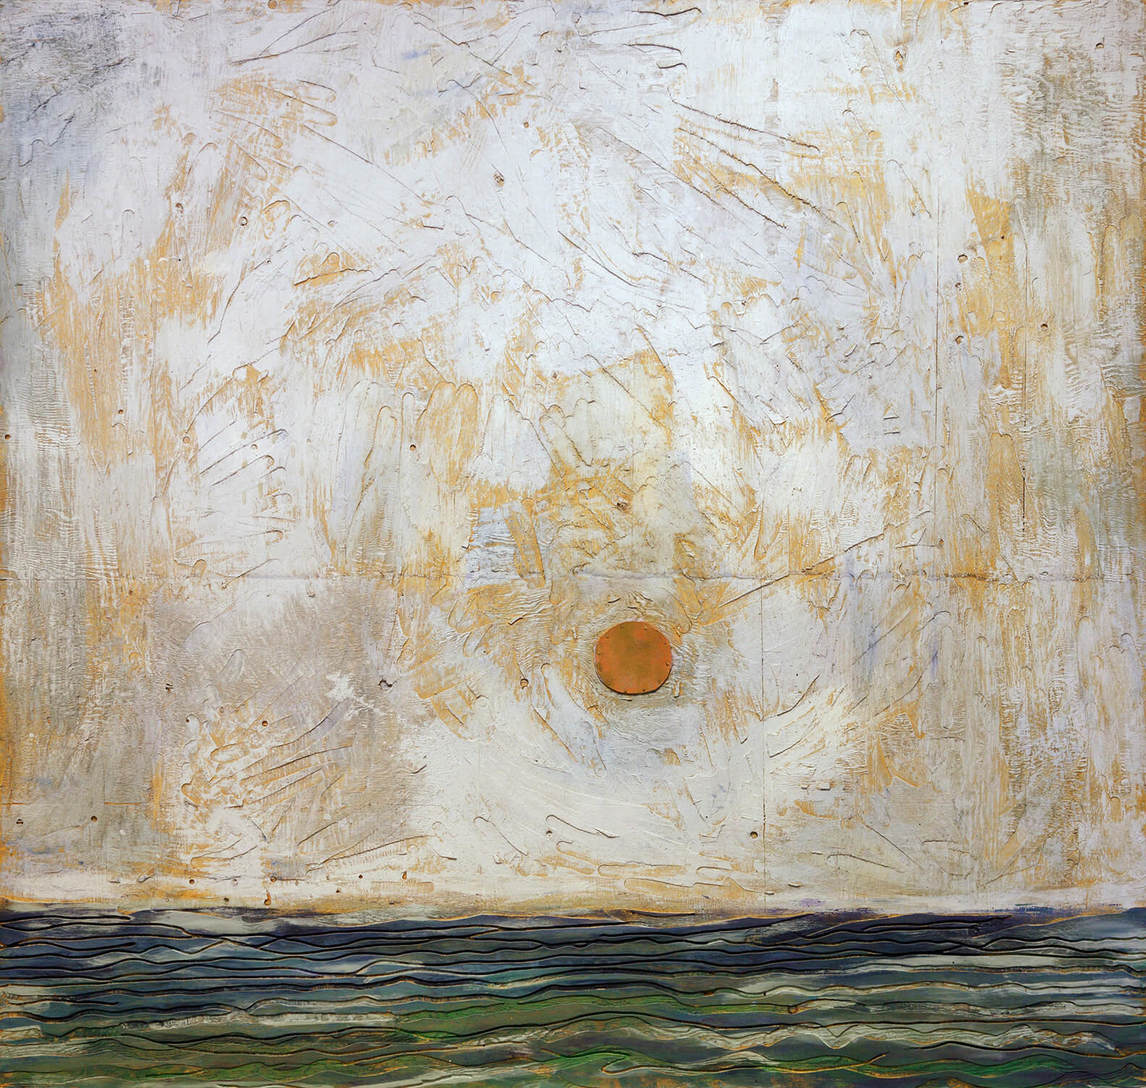 Sunset over the Mediterranean, 1980, by Paterson Ewen